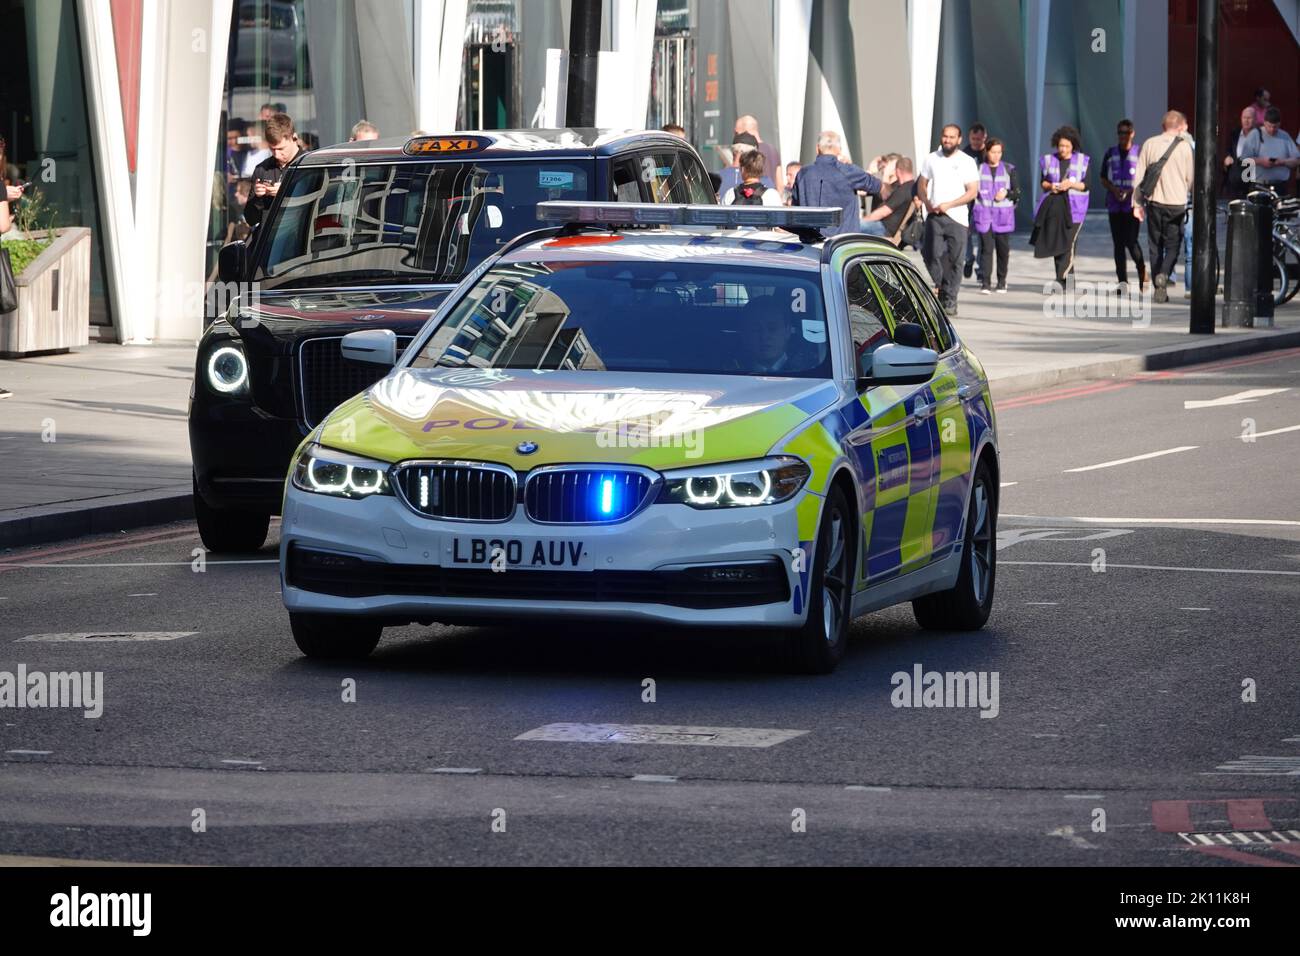 London, UK. 14th September 2022. On the death of Queen Elizabeth II - a police car with lights flashing in Westminster on the day the Queen's coffin is taken in a procession from Buckingham Palace to Westminster Hall for the lying-in-state, followed by her children and grandchildren, including King Charles III. Credit: Andrew Stehrenberger / Alamy Live News Stock Photo